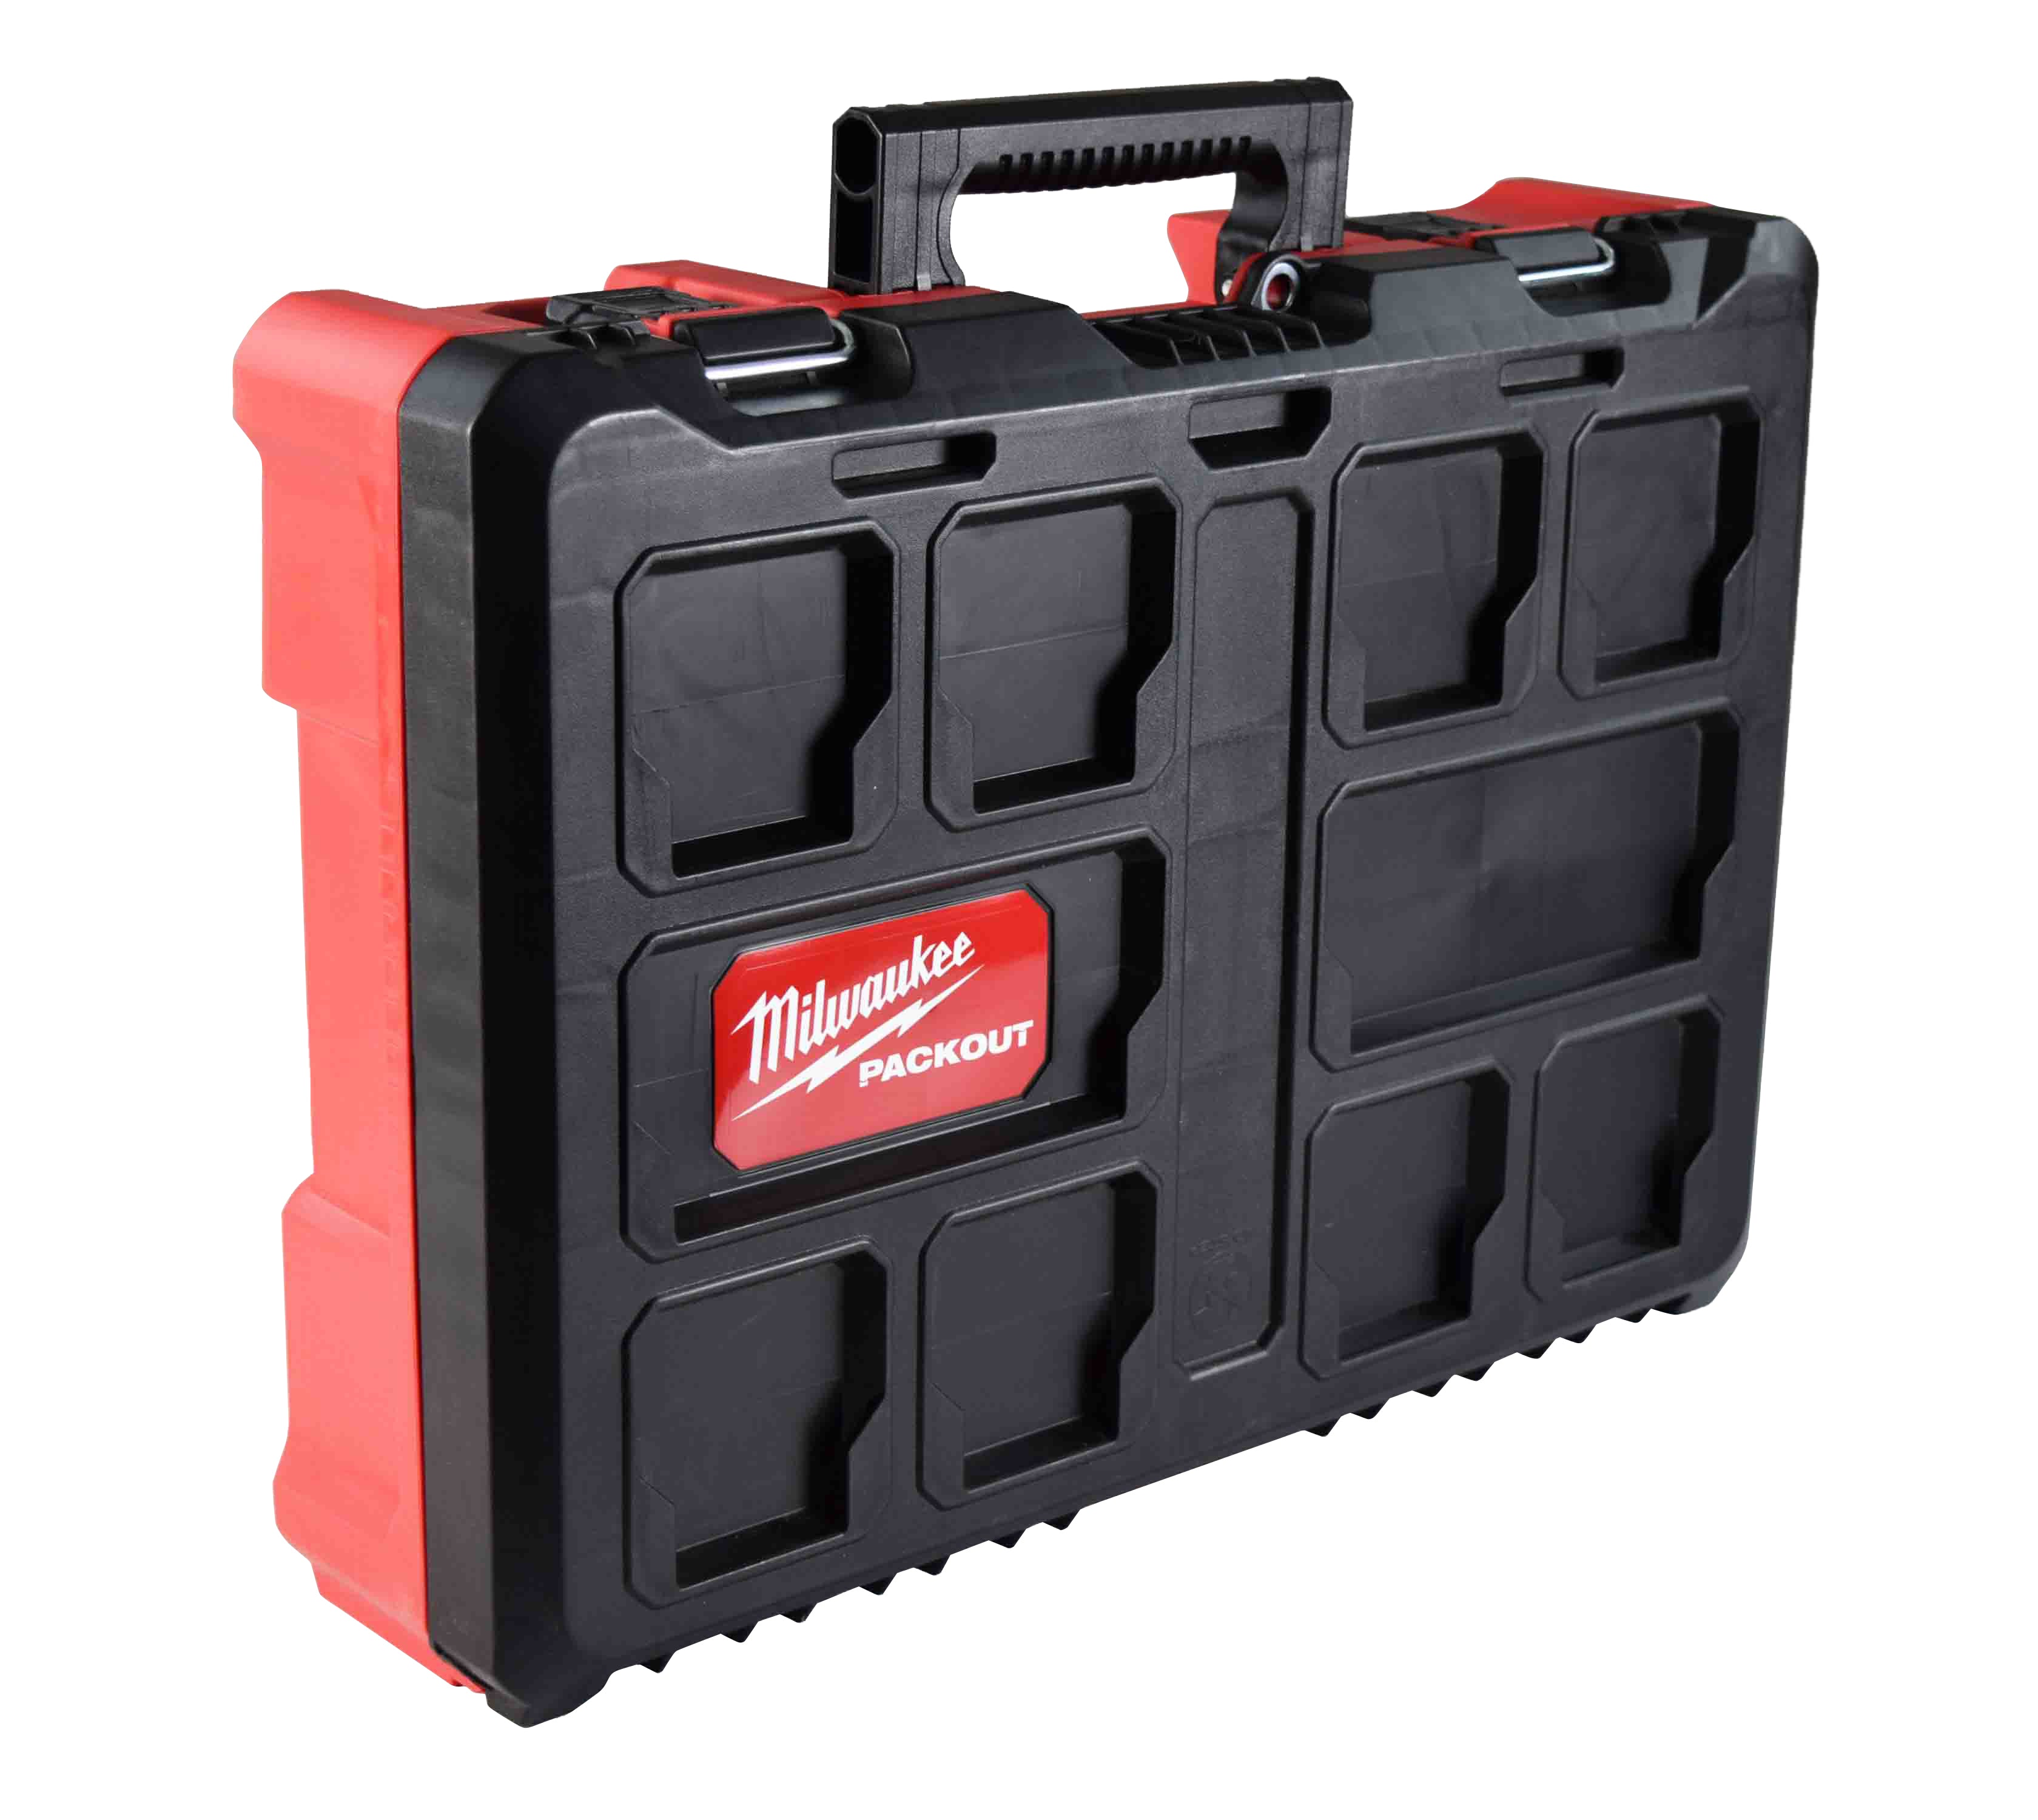 Packout Tool Case w/ Customizable Foam Insert by Milwaukee at